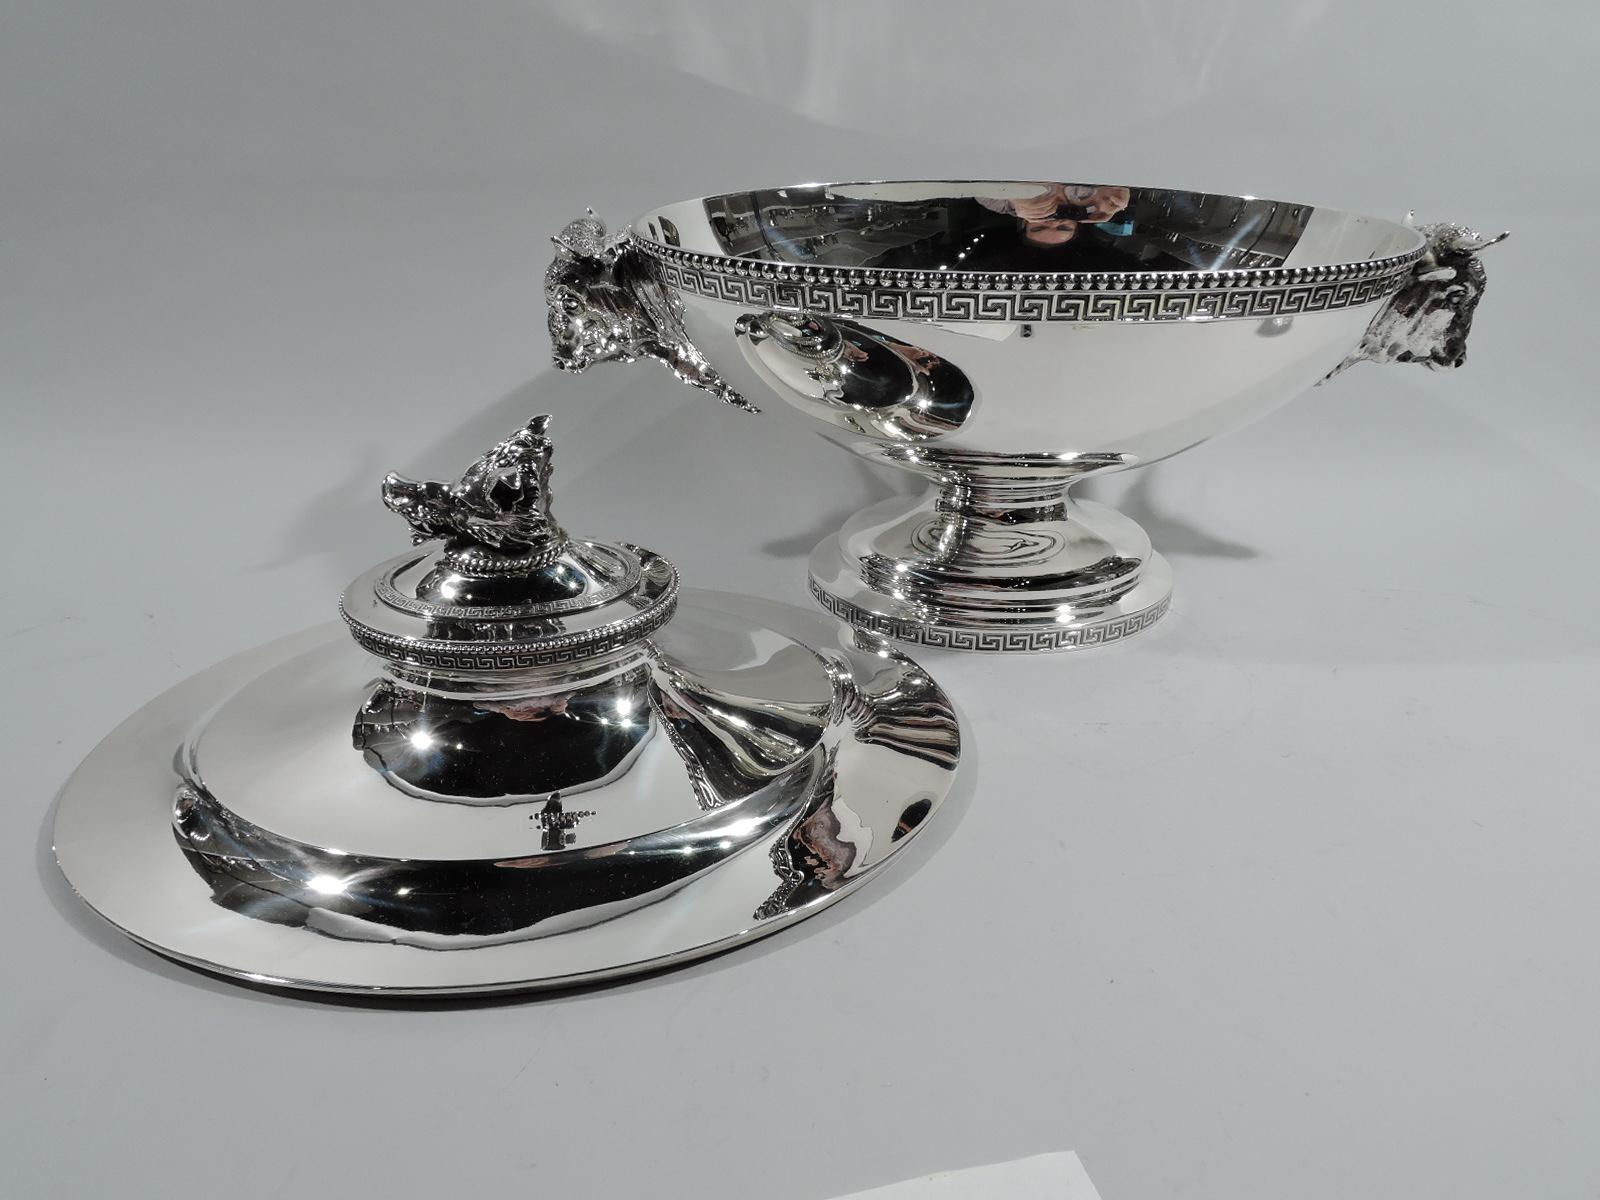 Early sterling silver soup tureen. Made by John C. Moore for Tiffany & Co. at 550 Broadway, New York. Ovoid bowl on domed foot; cover domed. Beaded and fretwork borders. Cast animal heads: Bowl ends have shaggy, horned oxen, and cover finial is a